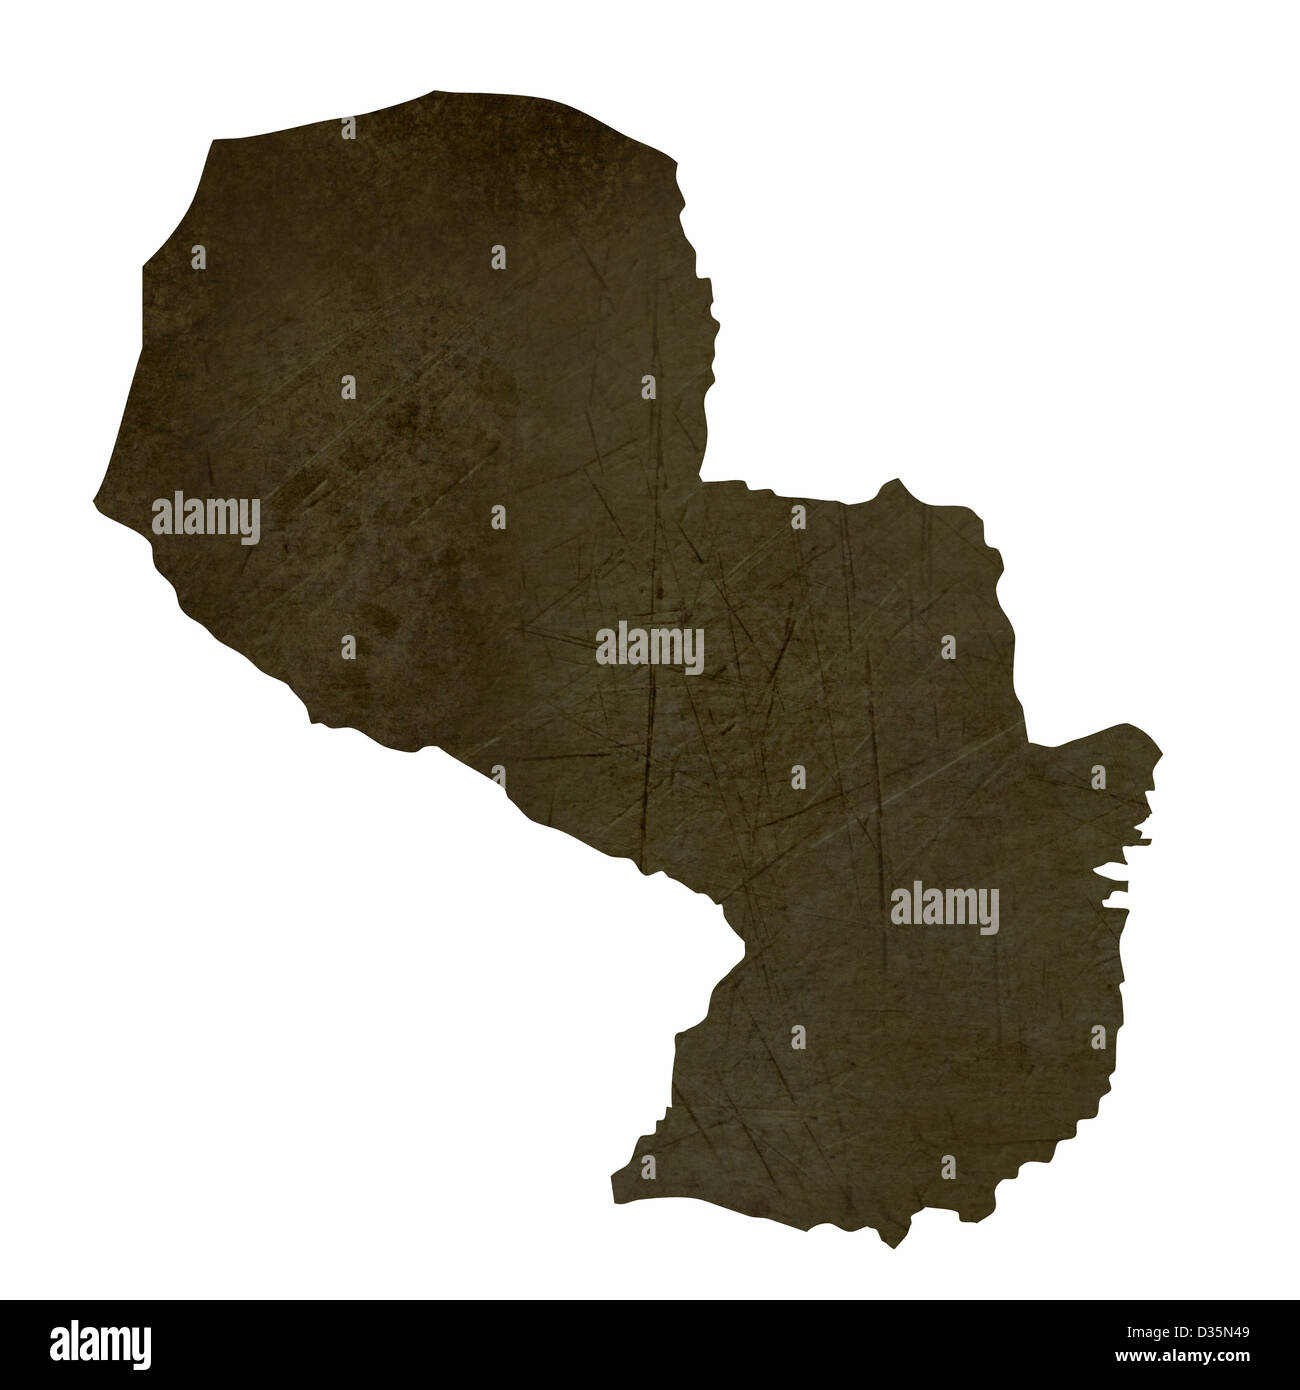 Dark silhouetted and textured map of Paraguay isolated on white background. Stock Photo